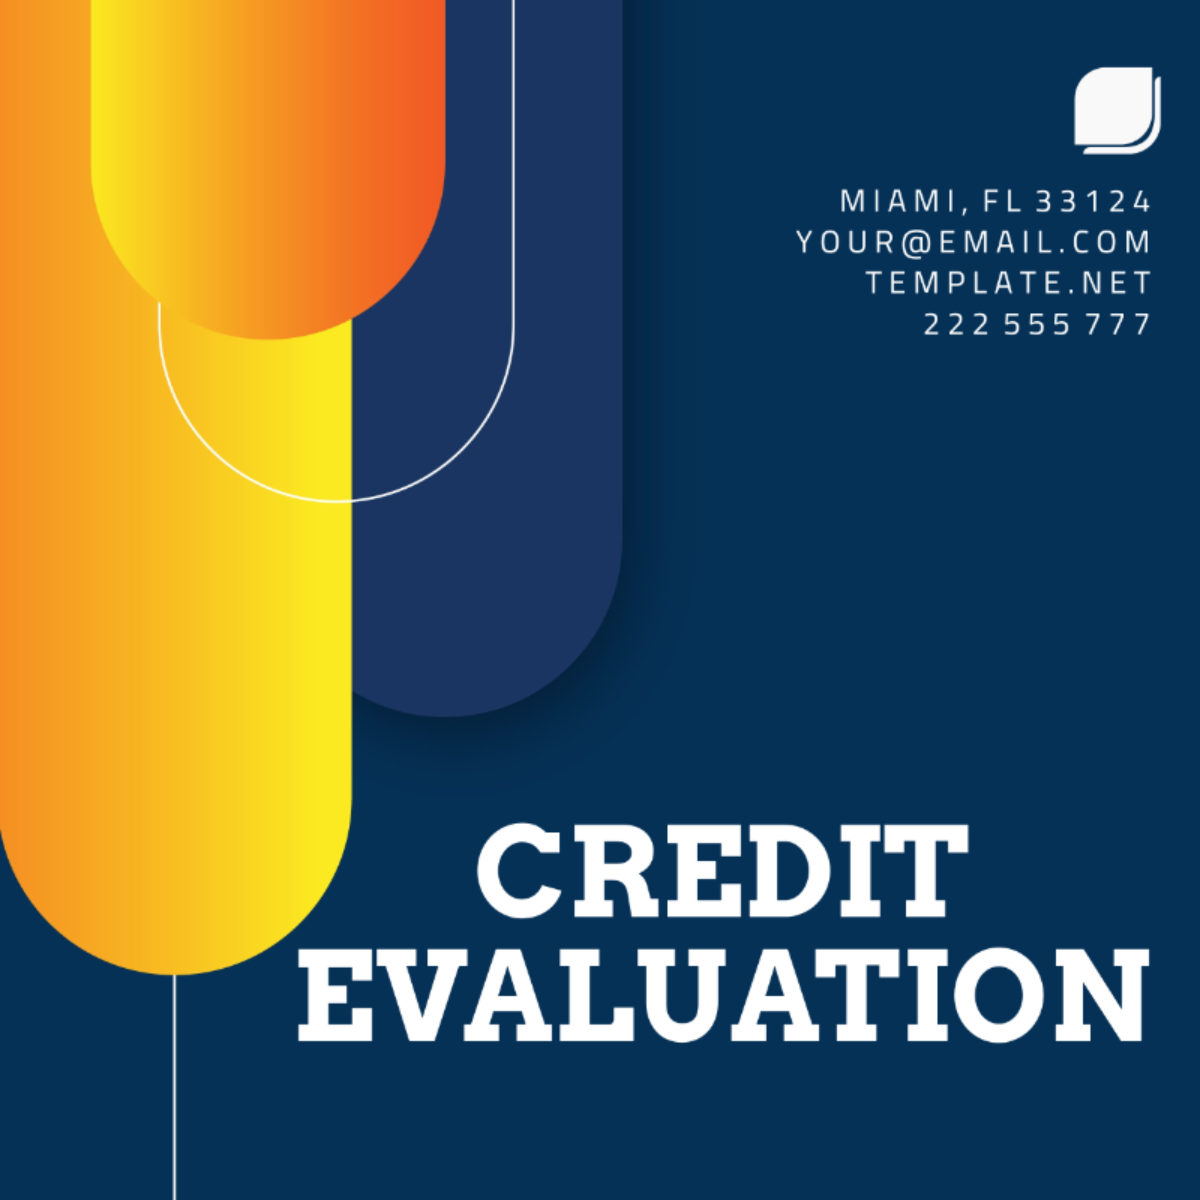 Credit Evaluation Template